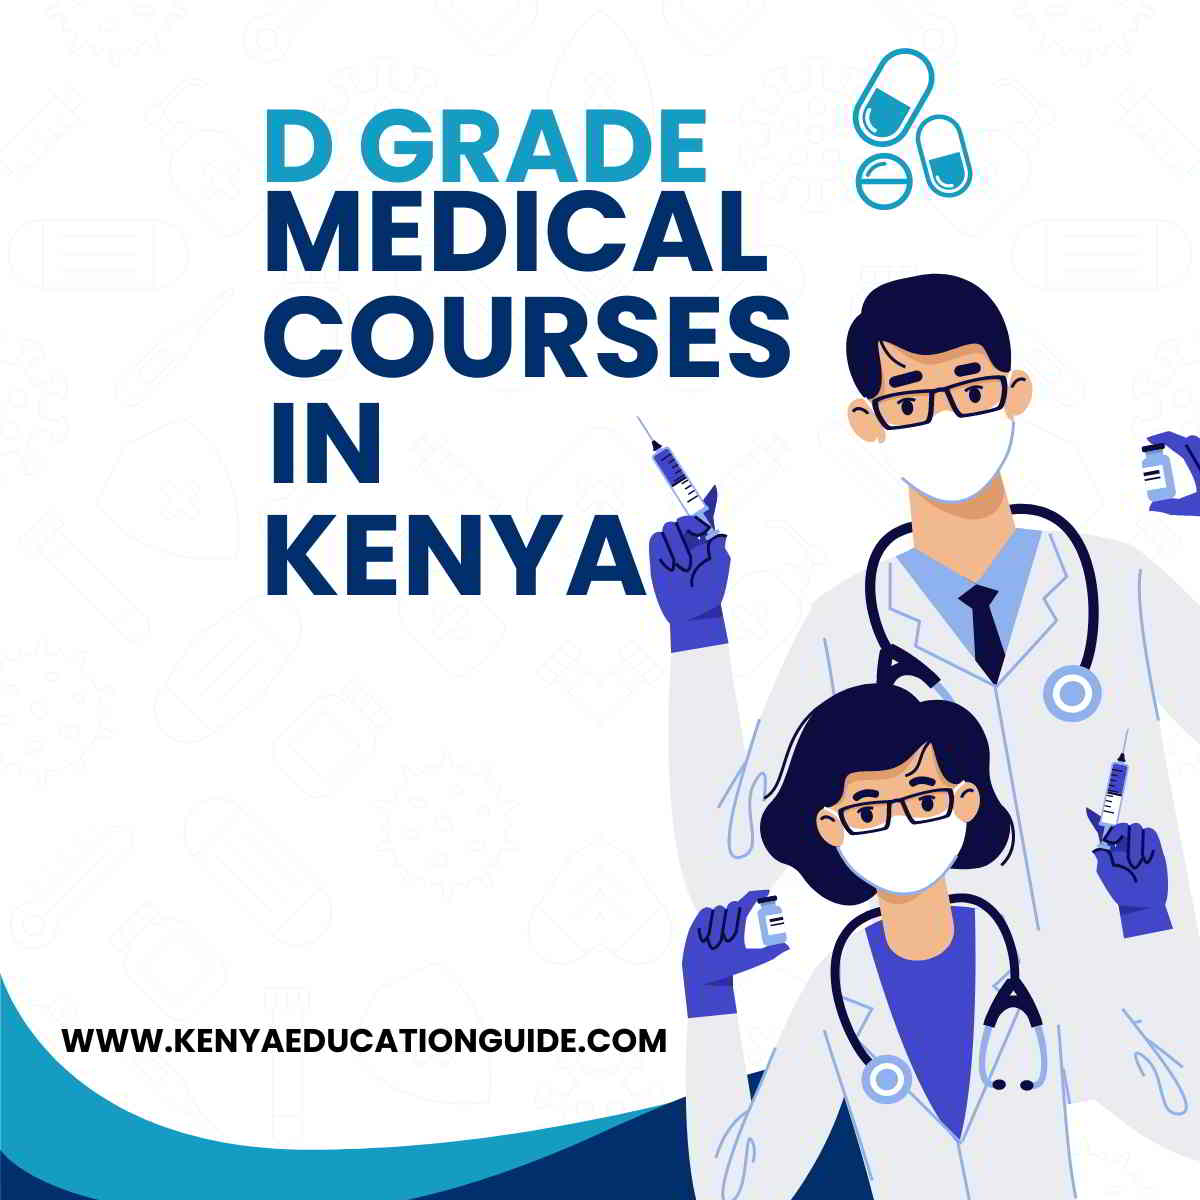 Medical courses with D plain